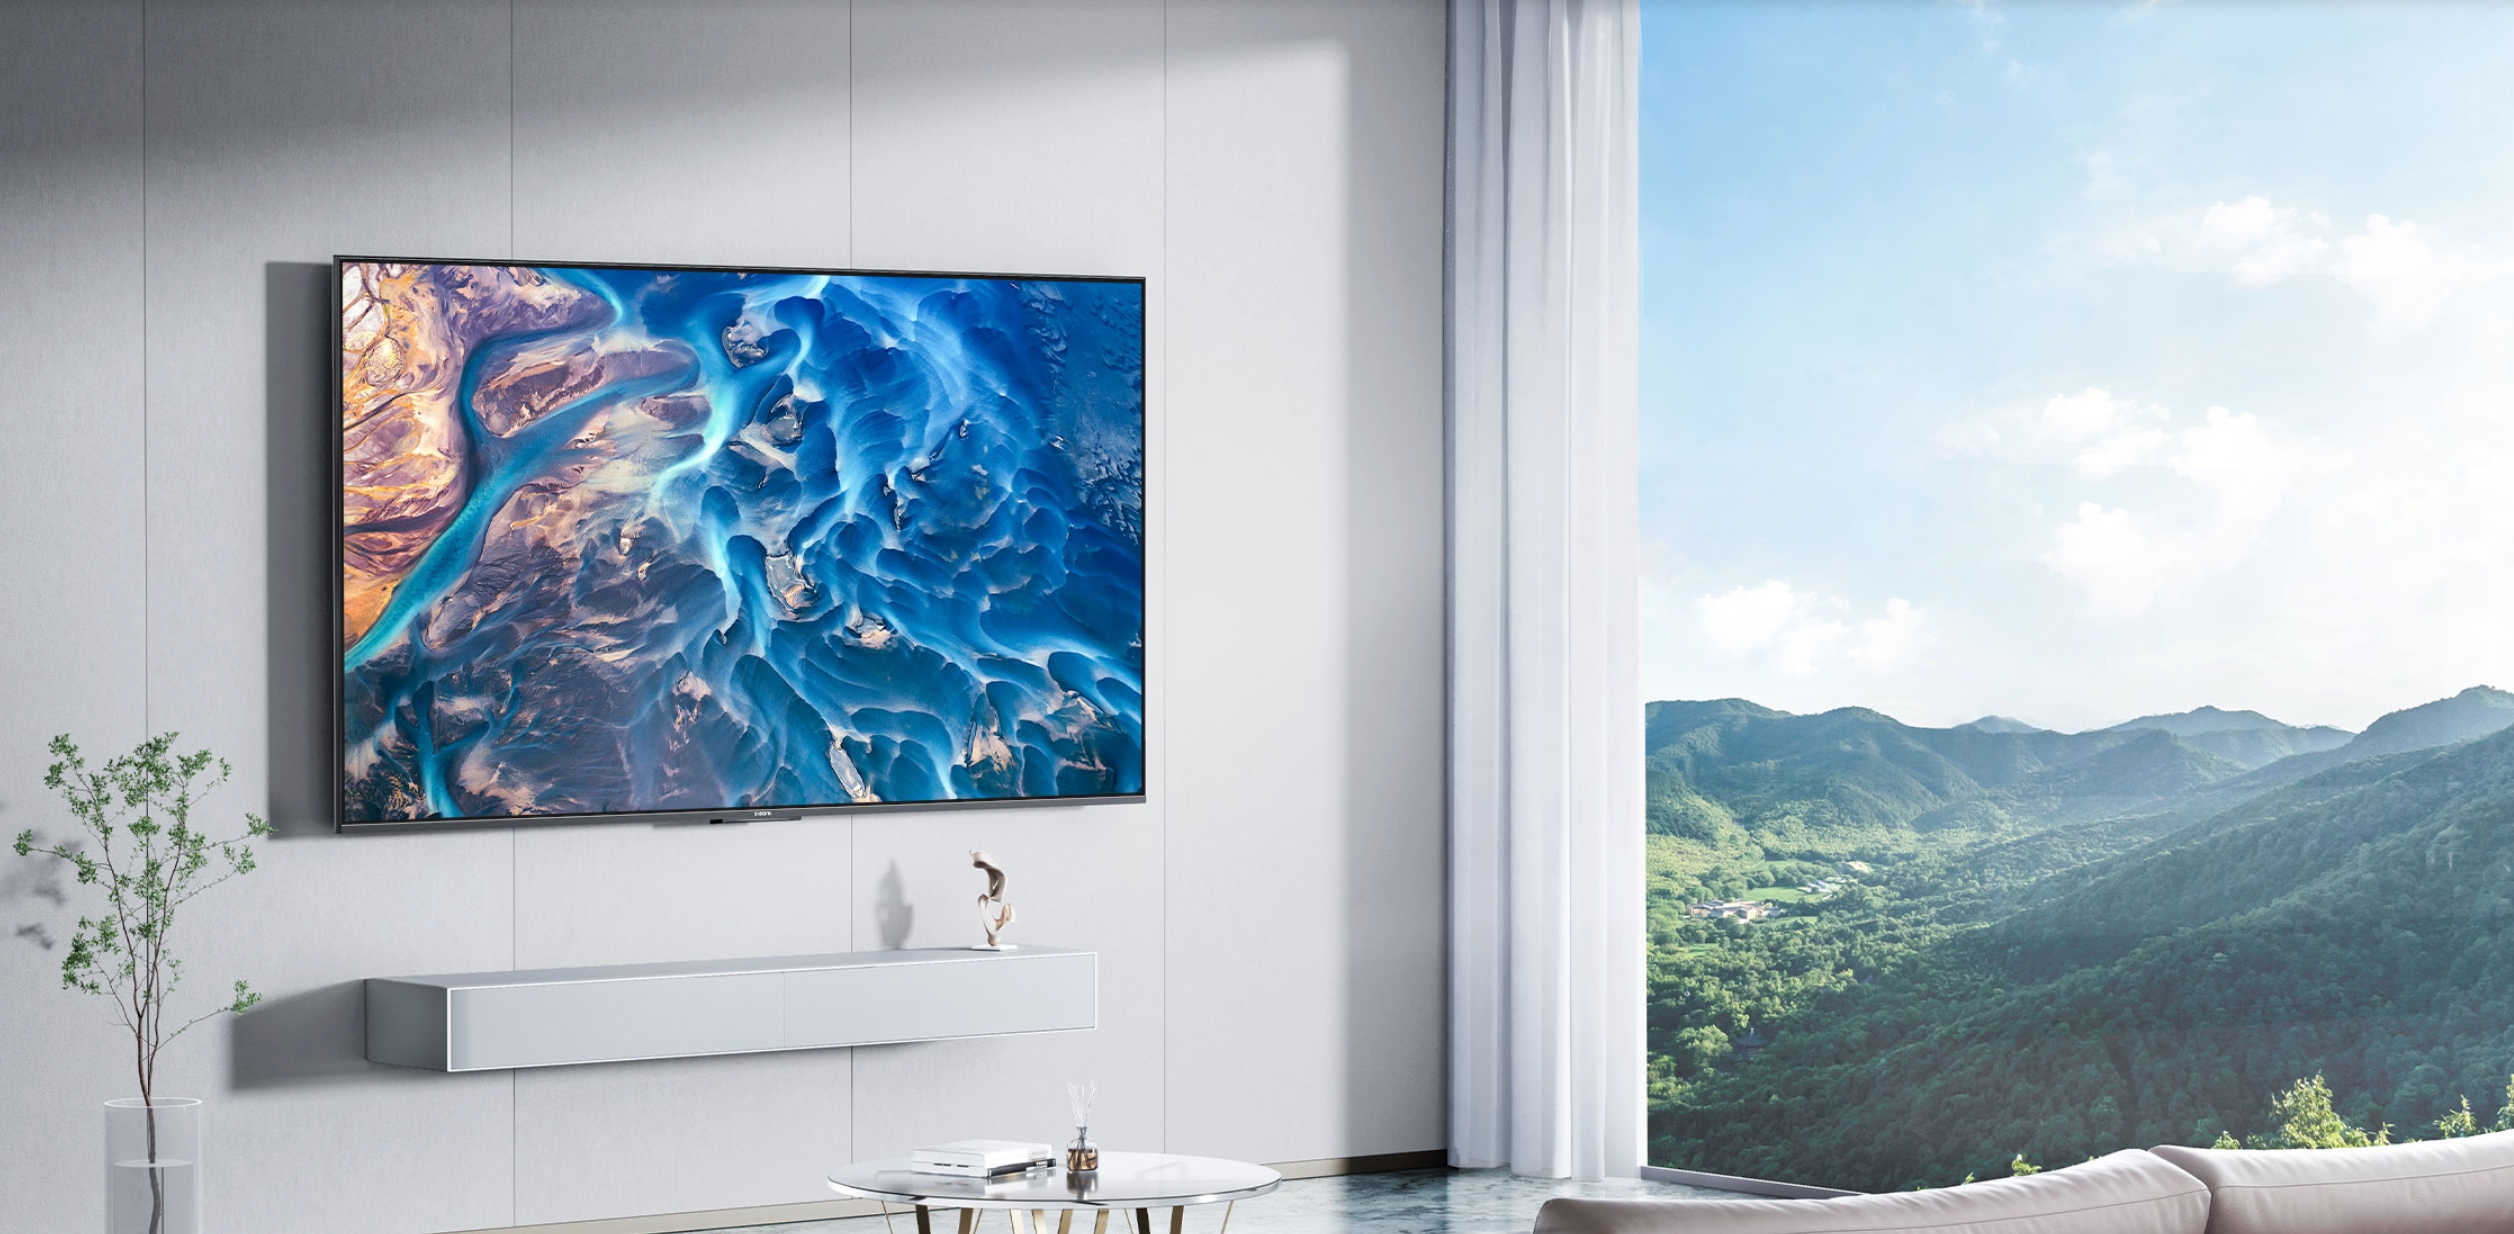 Xiaomi Mi TV ES 2022: 4K TVs 55, 65 and 75 inches with MediaTek chips, 2 GB of RAM and a price from $526